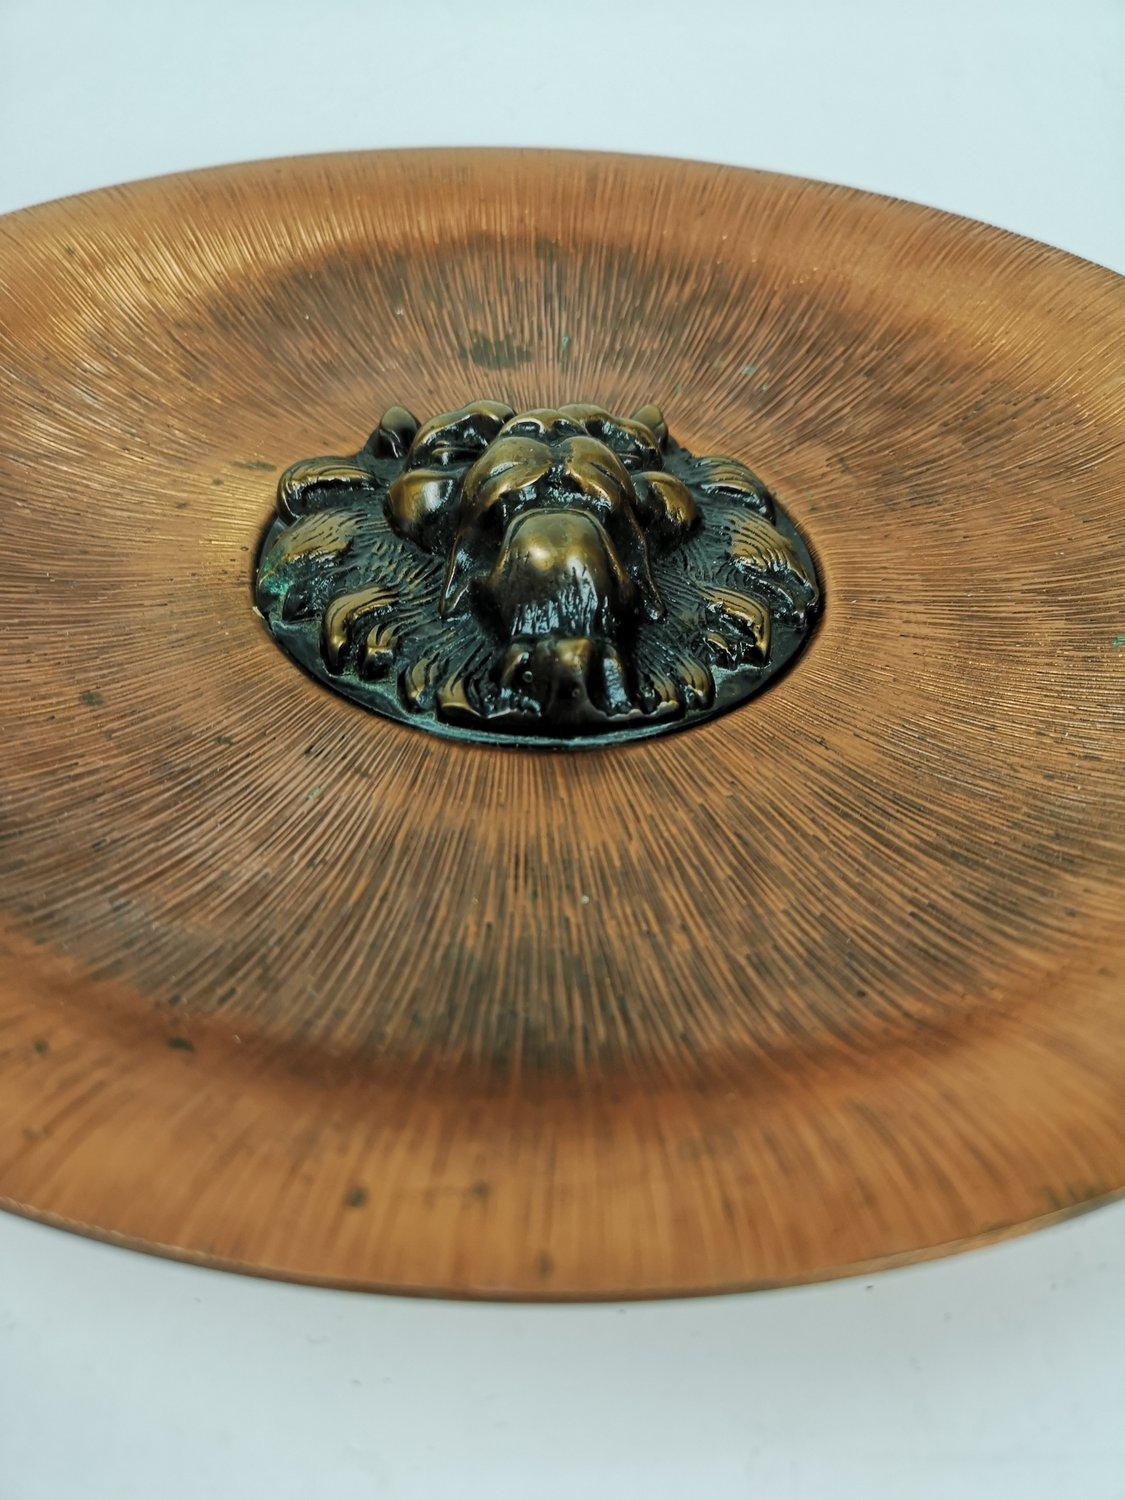 Decorative bronze wall plate with a stylized lion head in the middle. The copper surface features an extraordinary and beautiful copper surface. An outstanding Mid-Century Modern decorative item.